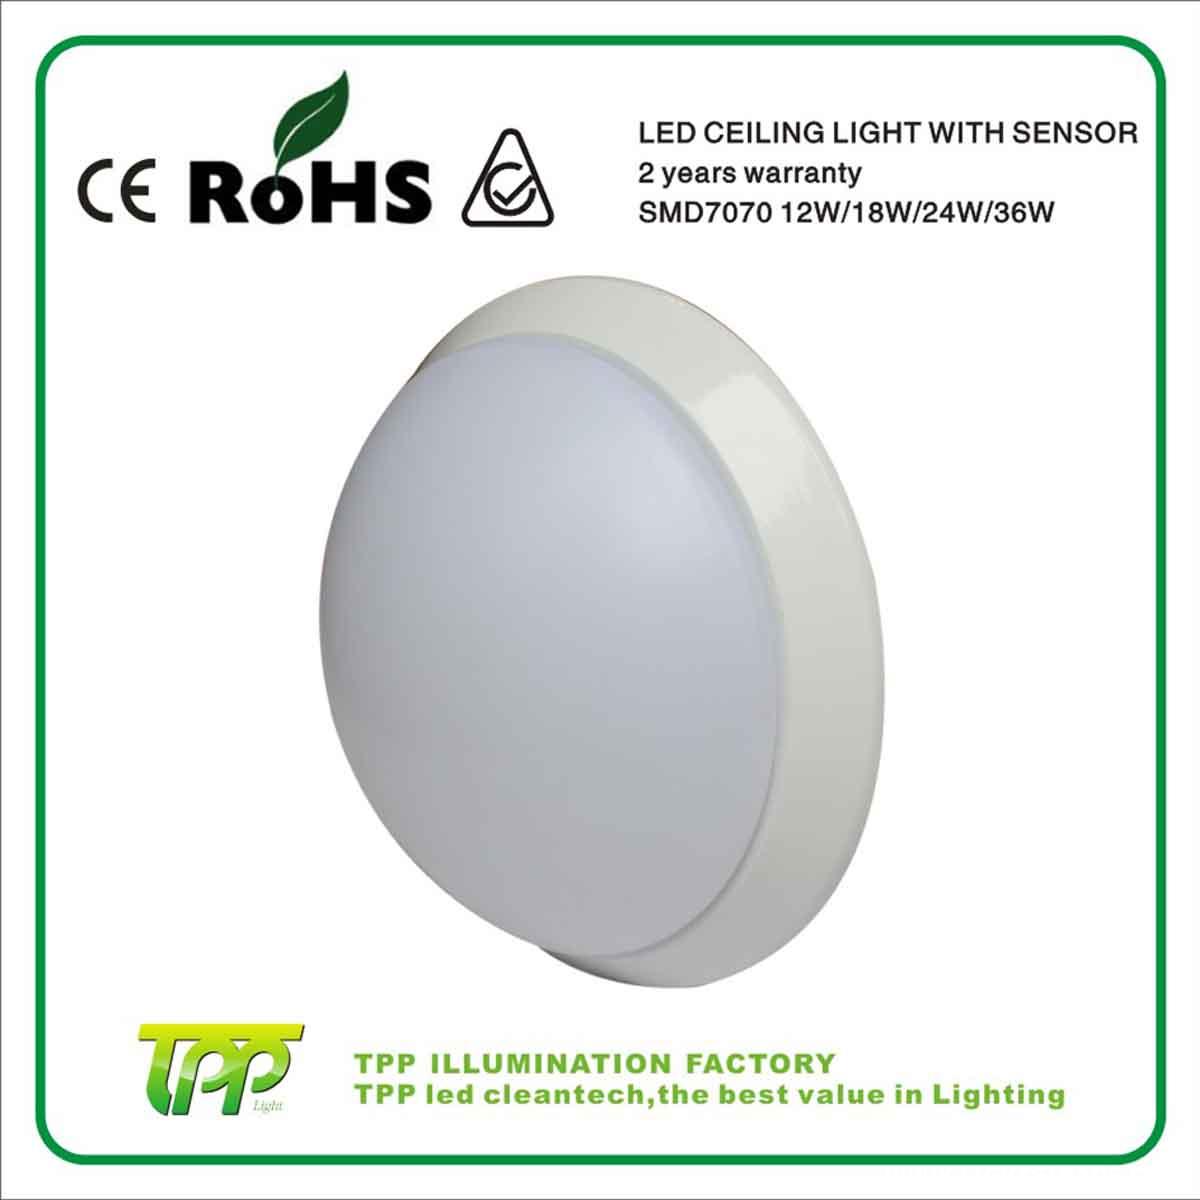 2013 high quality 24W SMD7070 Round plastic ceiling light cevers with Microwave Sensor